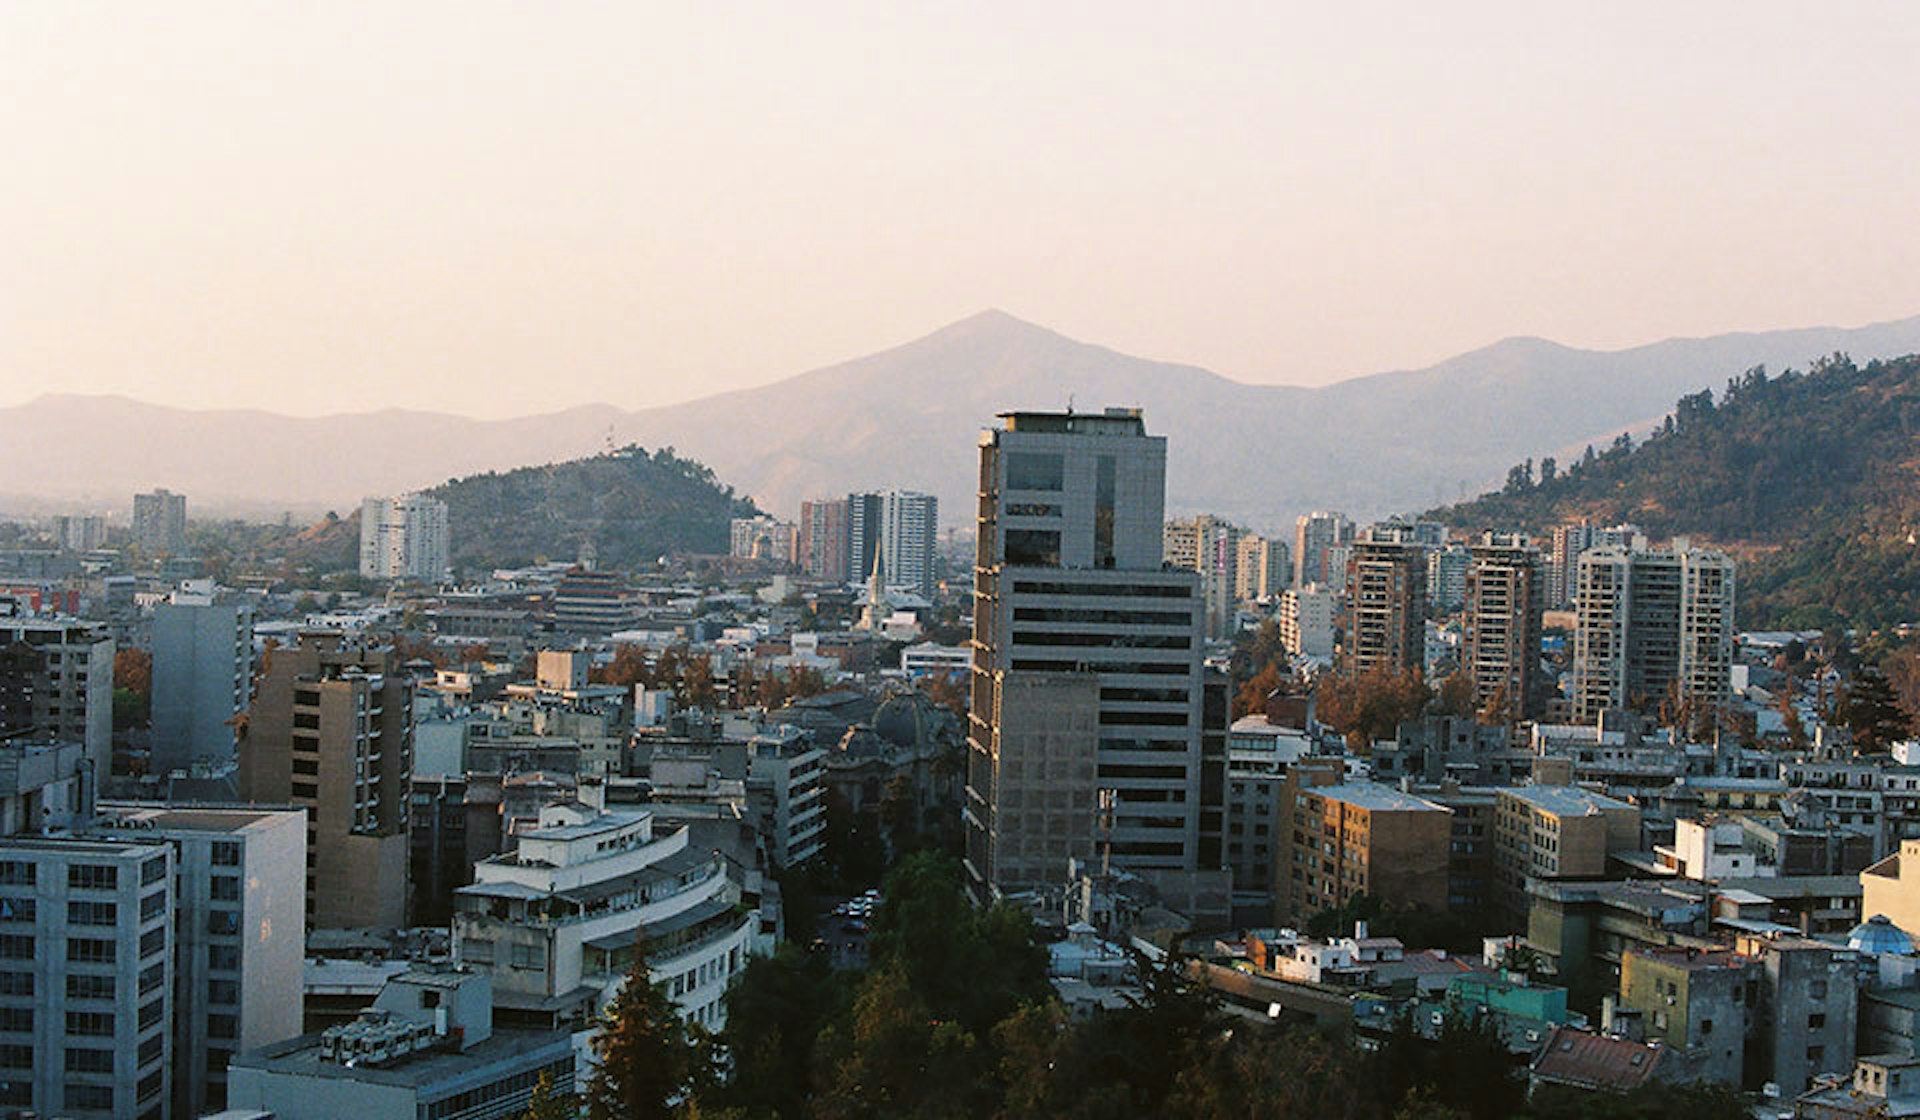 Santiago's homegrown brands and shops are embracing their roots